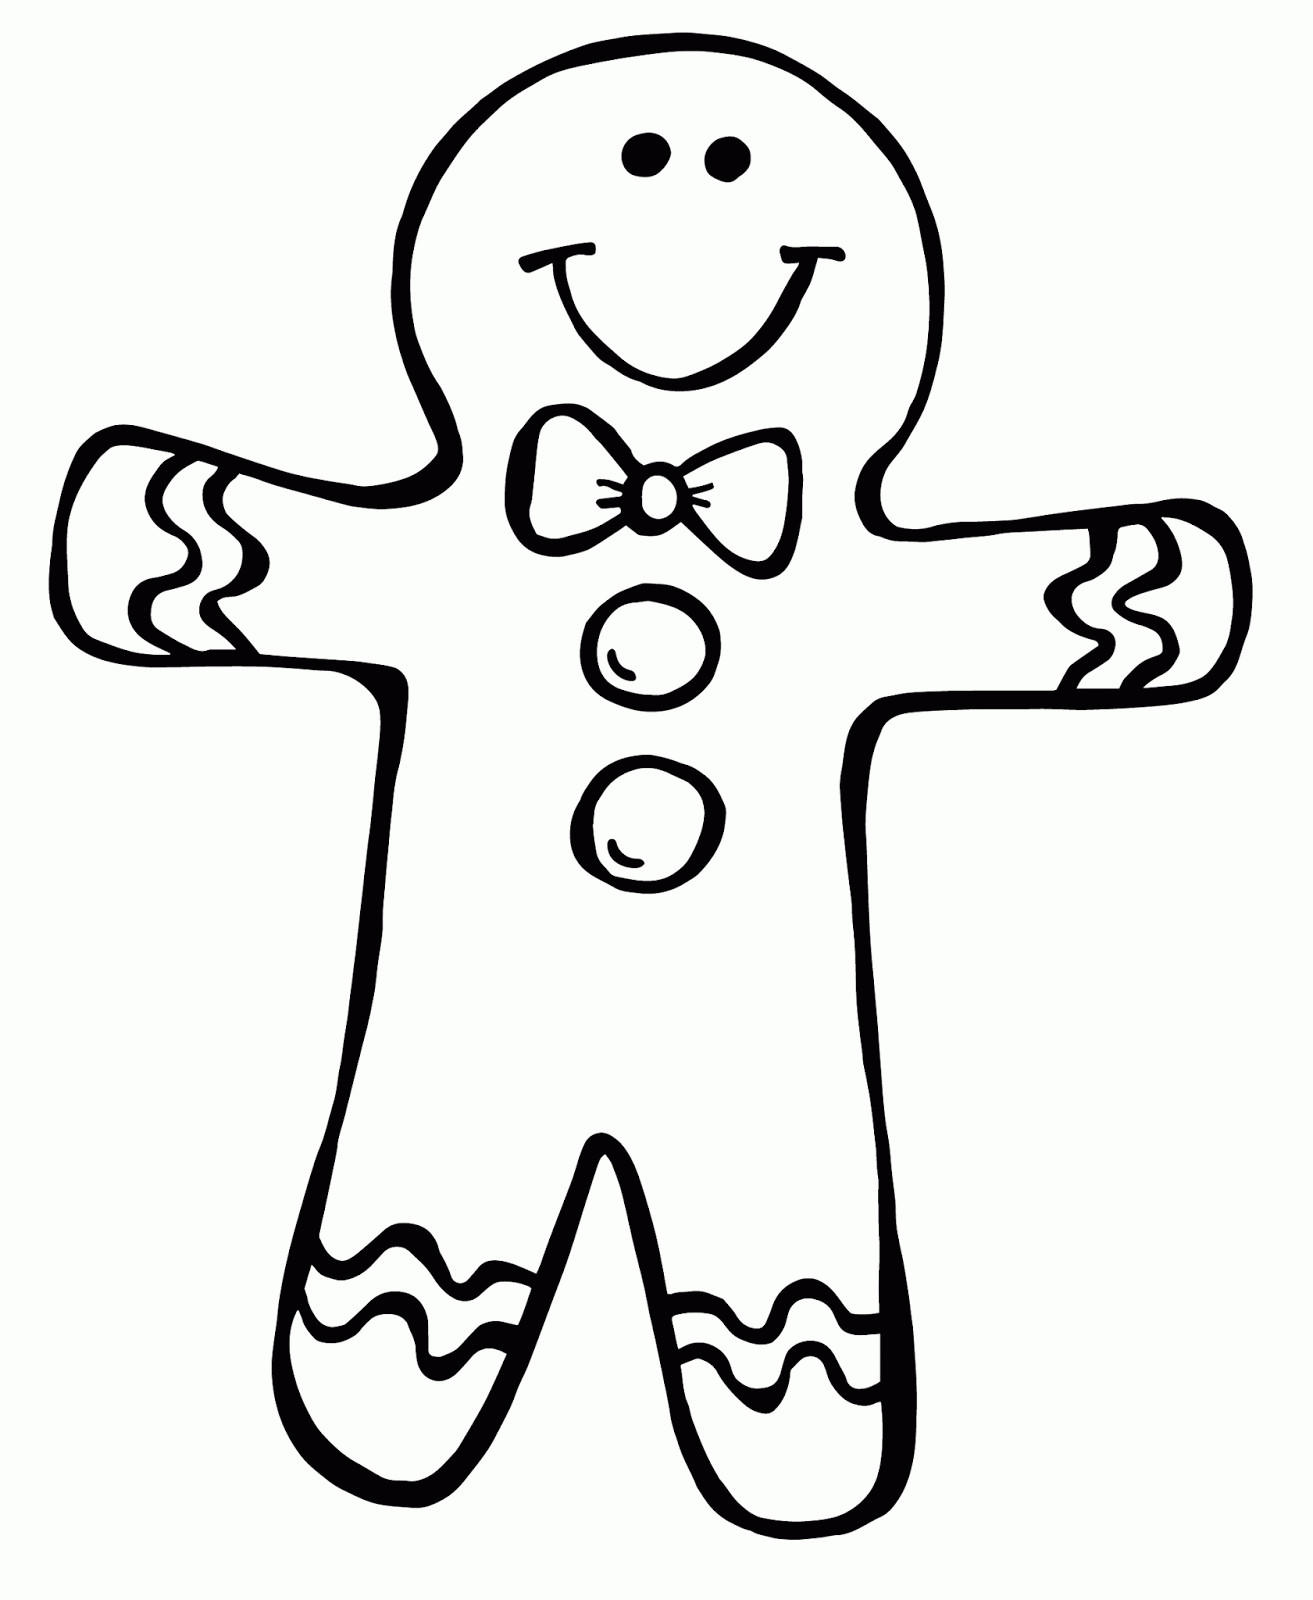 Gingerbread Boy And Girl Coloring Pages
 Gingerbread Boy And Girl Coloring Pages HiColoringPages